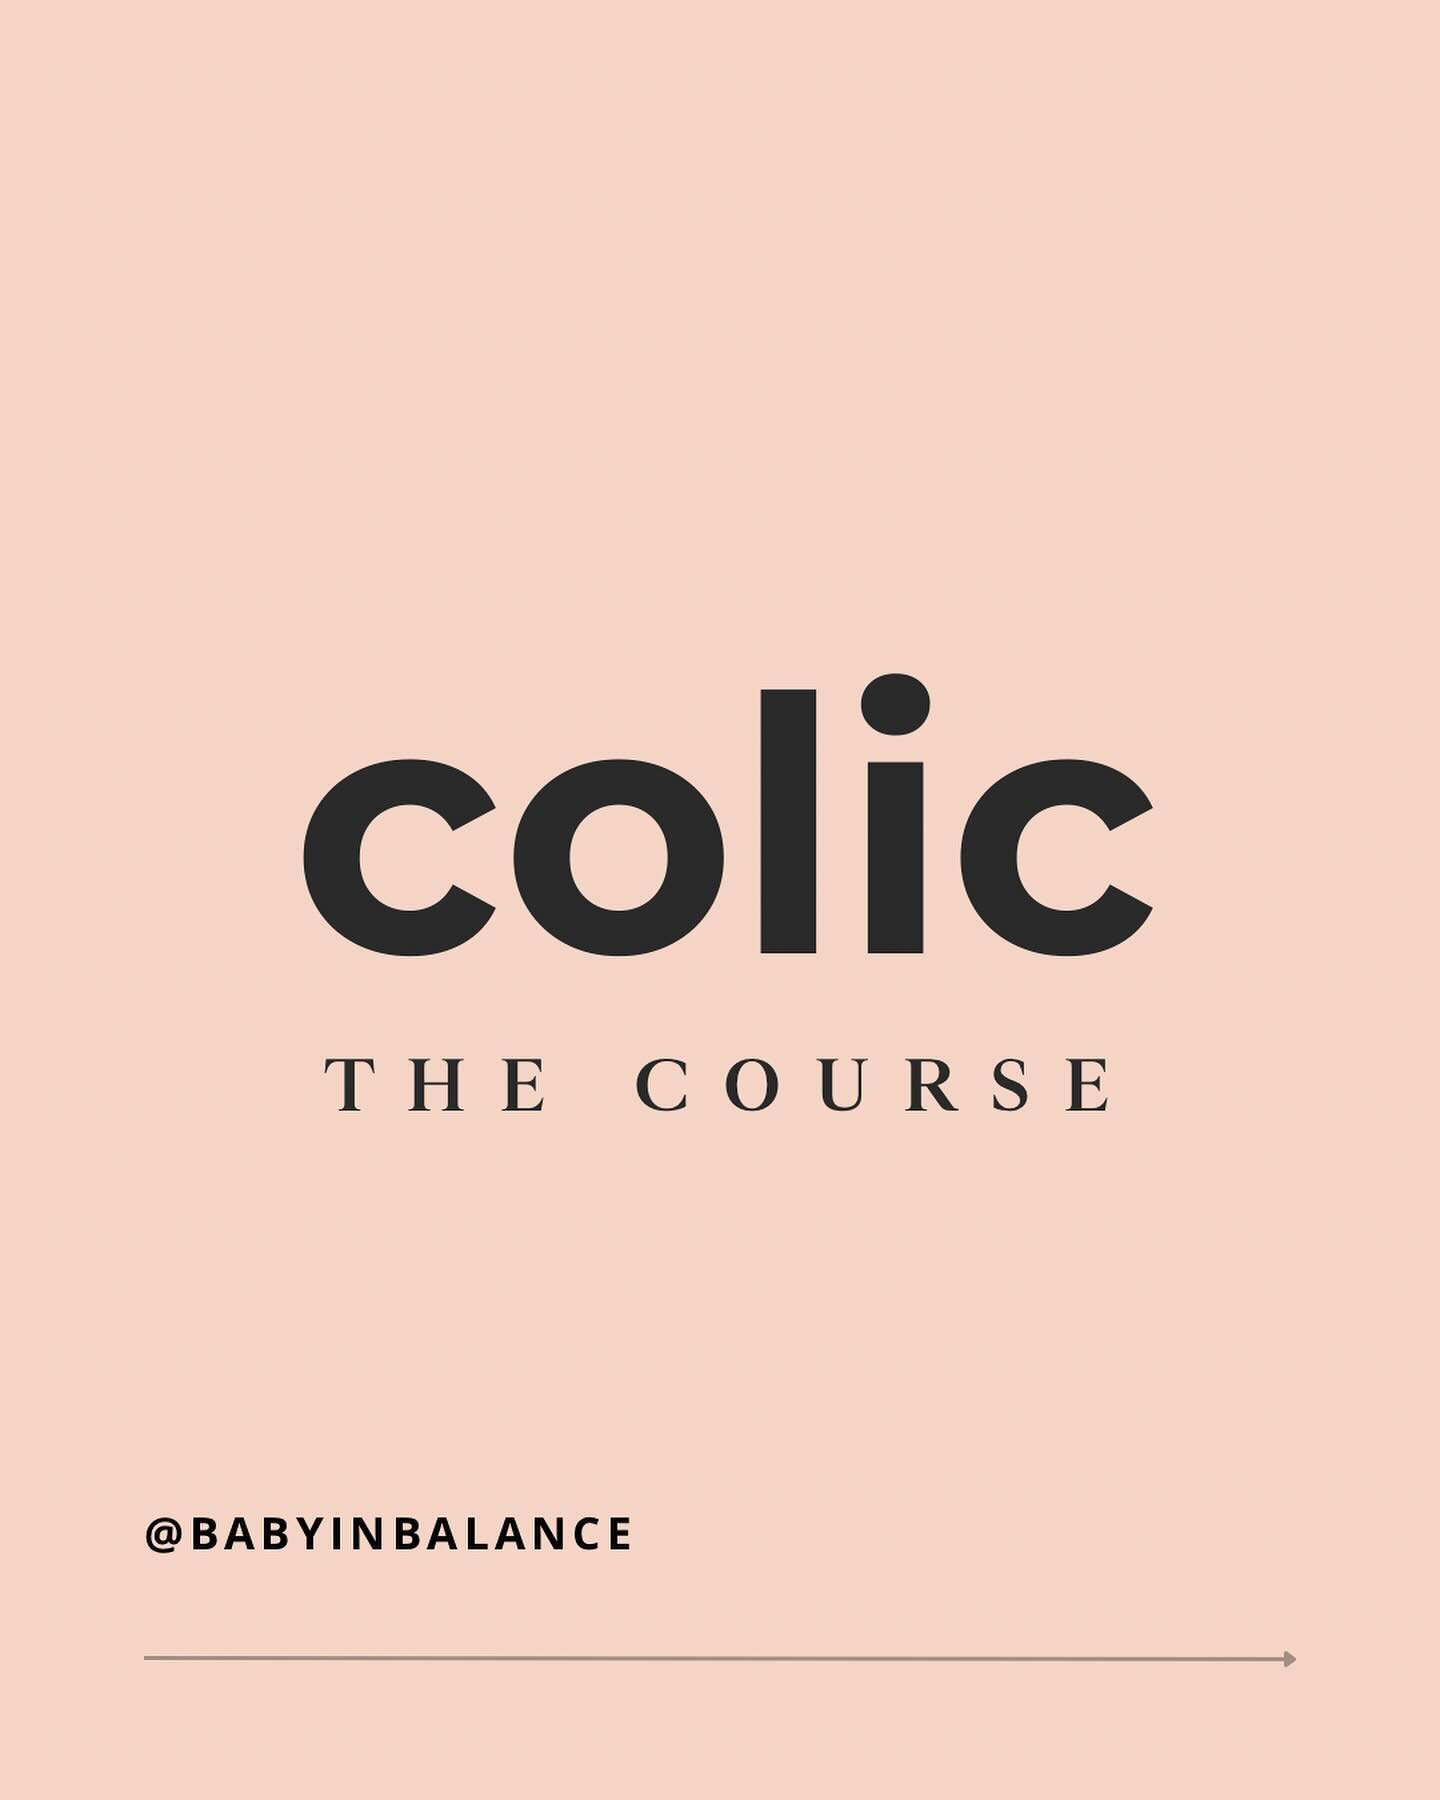 Learn how to confidently recognise and manage symptoms related to infant colic 🙌

You&rsquo;re a tired parent who is searching for simple and effective strategies so that you can confidently help your newborn&rsquo;s colic symptoms.

You&rsquo;ve ta